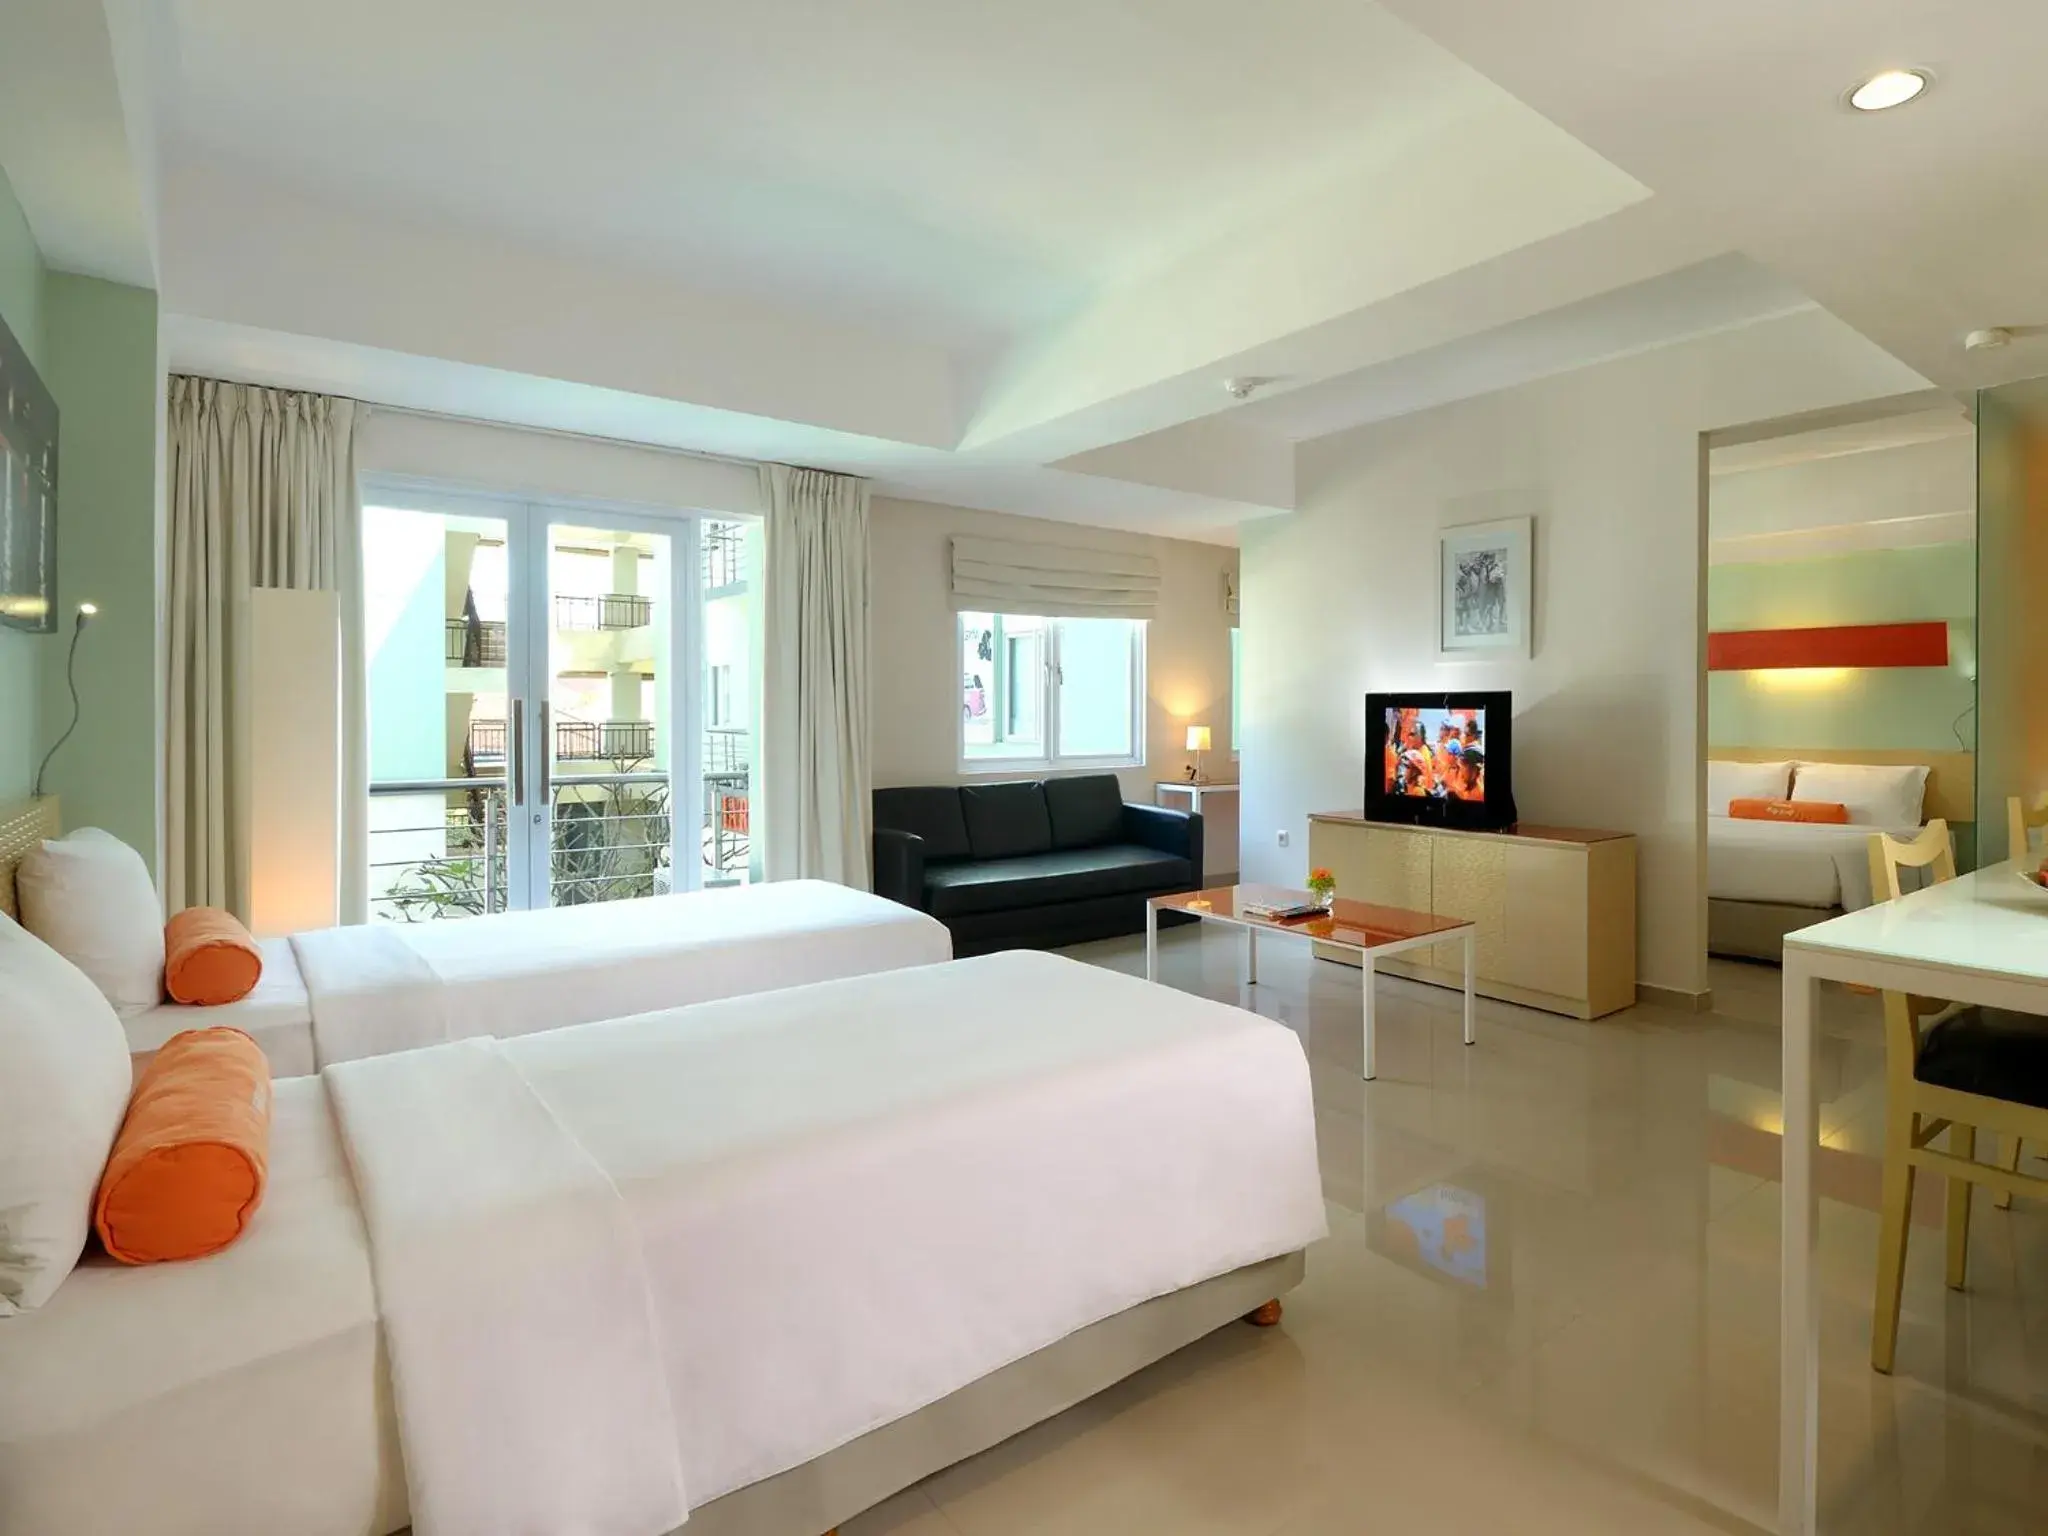 Bedroom in HOTEL and RESIDENCES Riverview Kuta - Bali (Associated HARRIS)